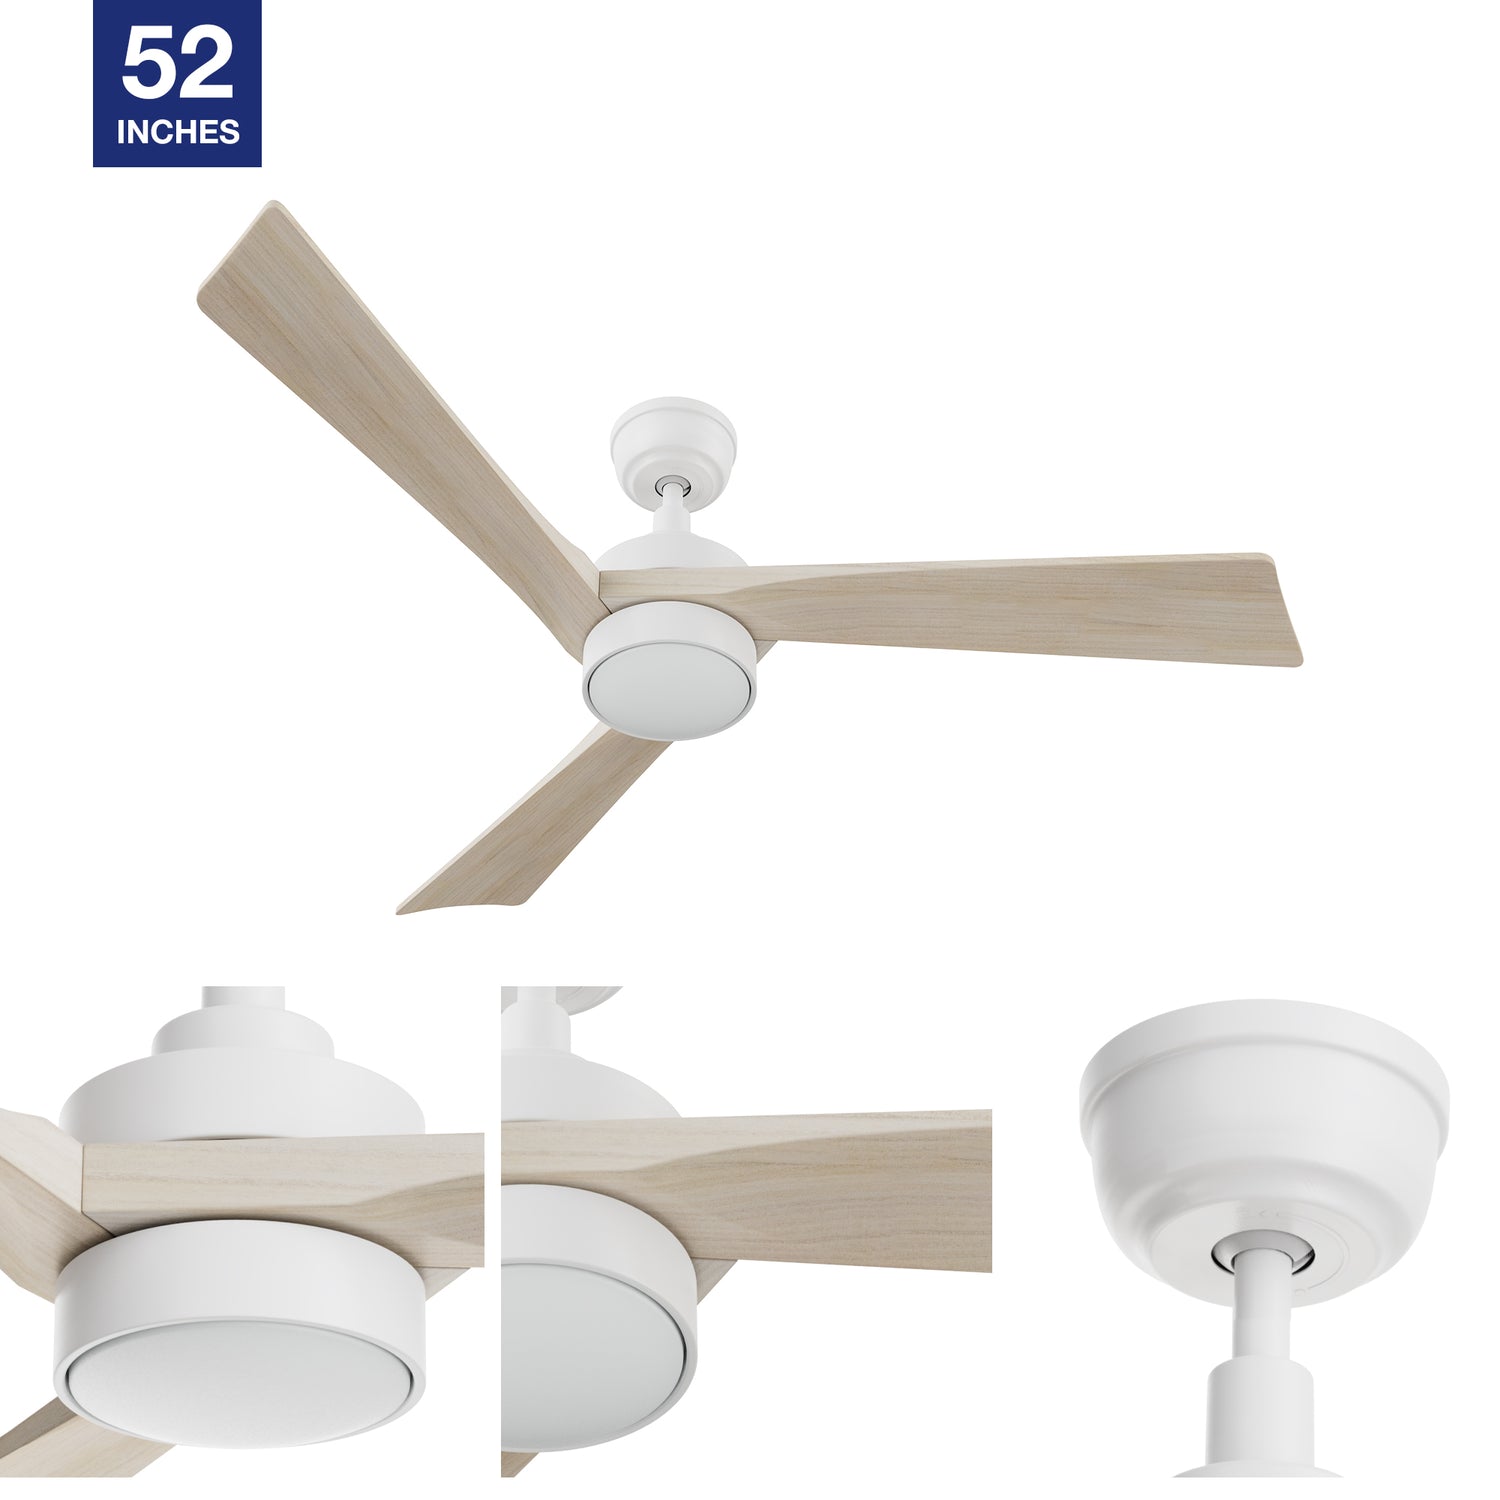 52in modern downrod mounted ceiling fan designs with white downrod and solid wood fan blades. 